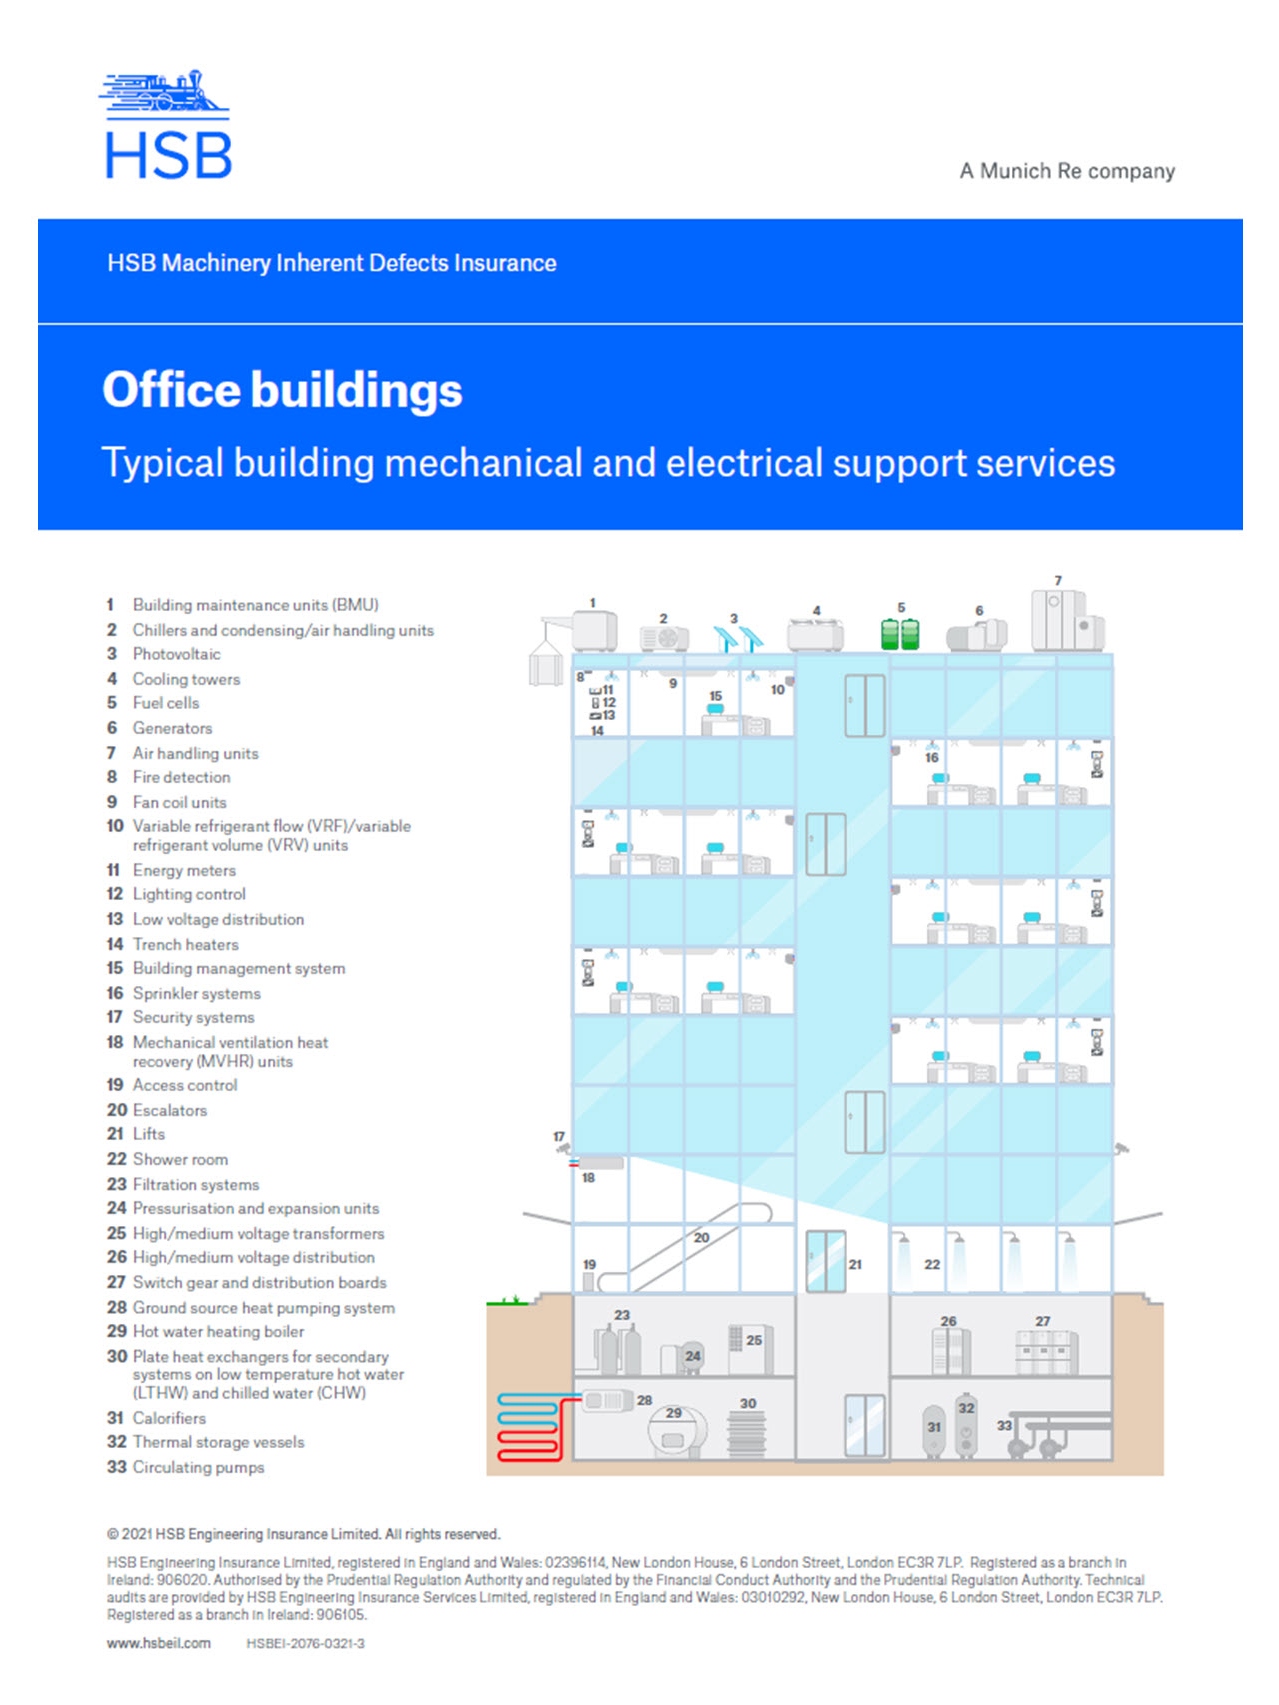 Building mechanical and electrical support services